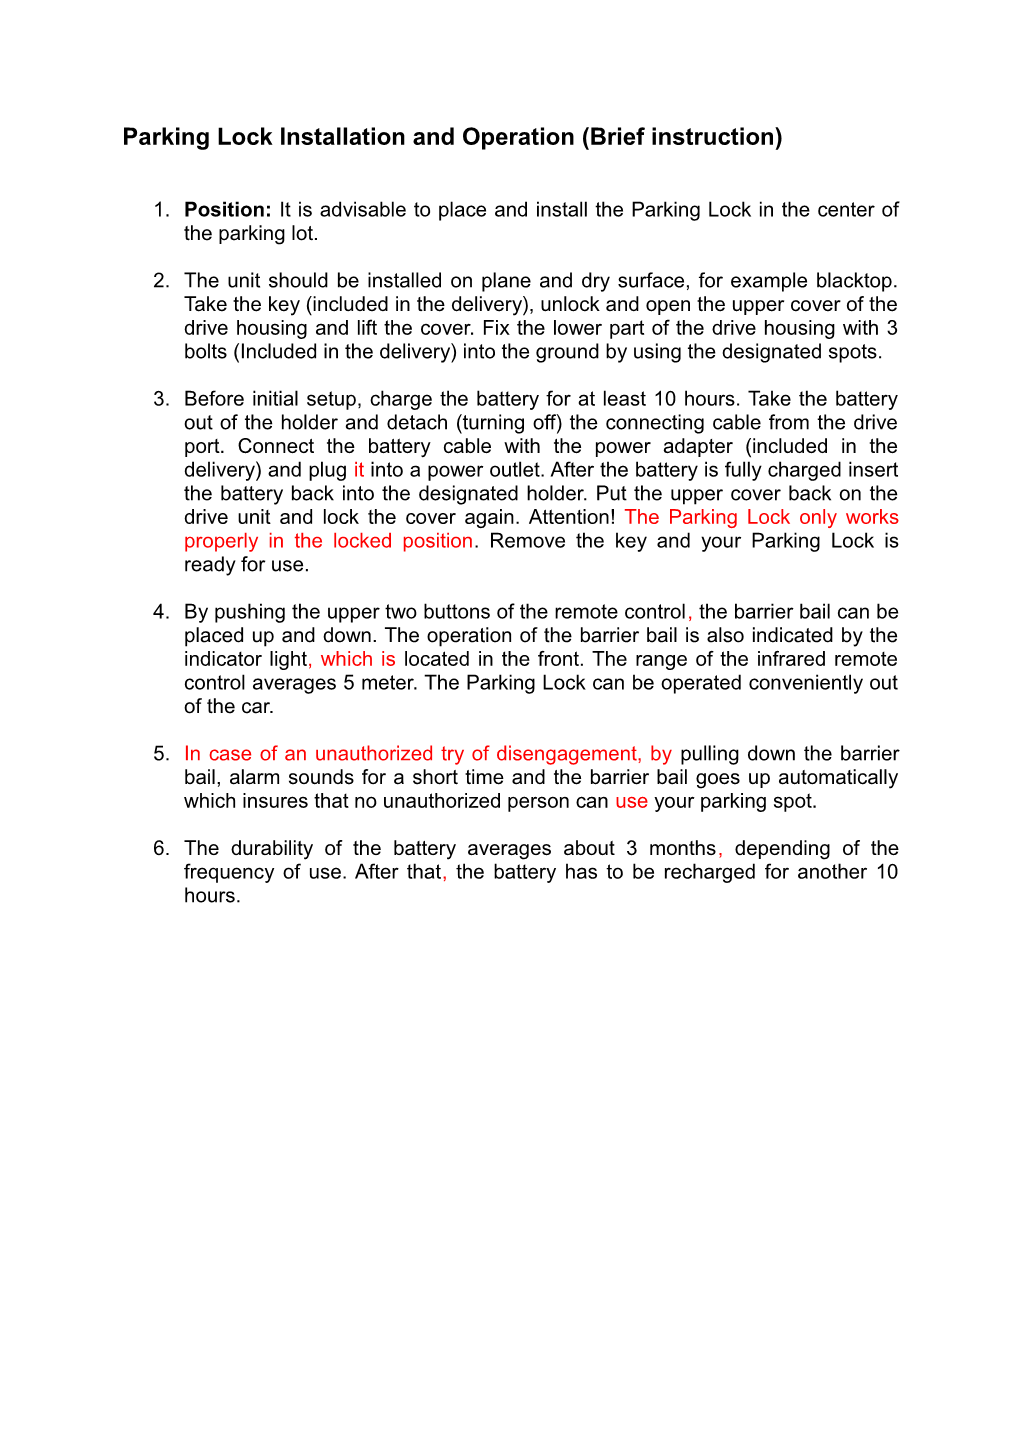 Parking Lock Installation and Operation (Brief Instruction)